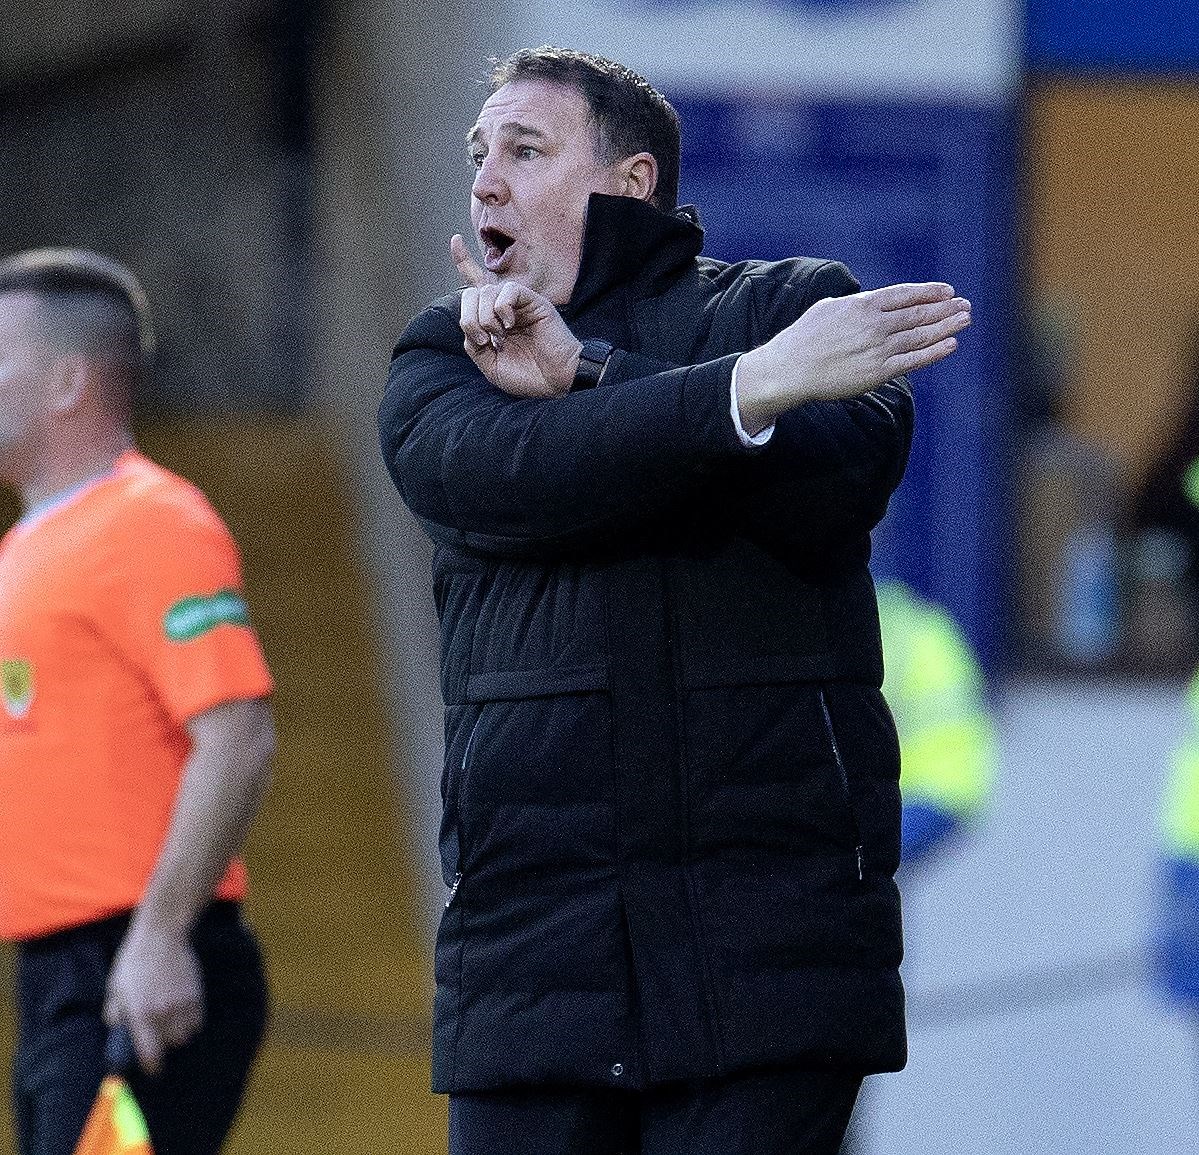 Malky Mackay says he understands the fans' frustration – but has urged them to keep backing the team. Picture: Ken Macpherson